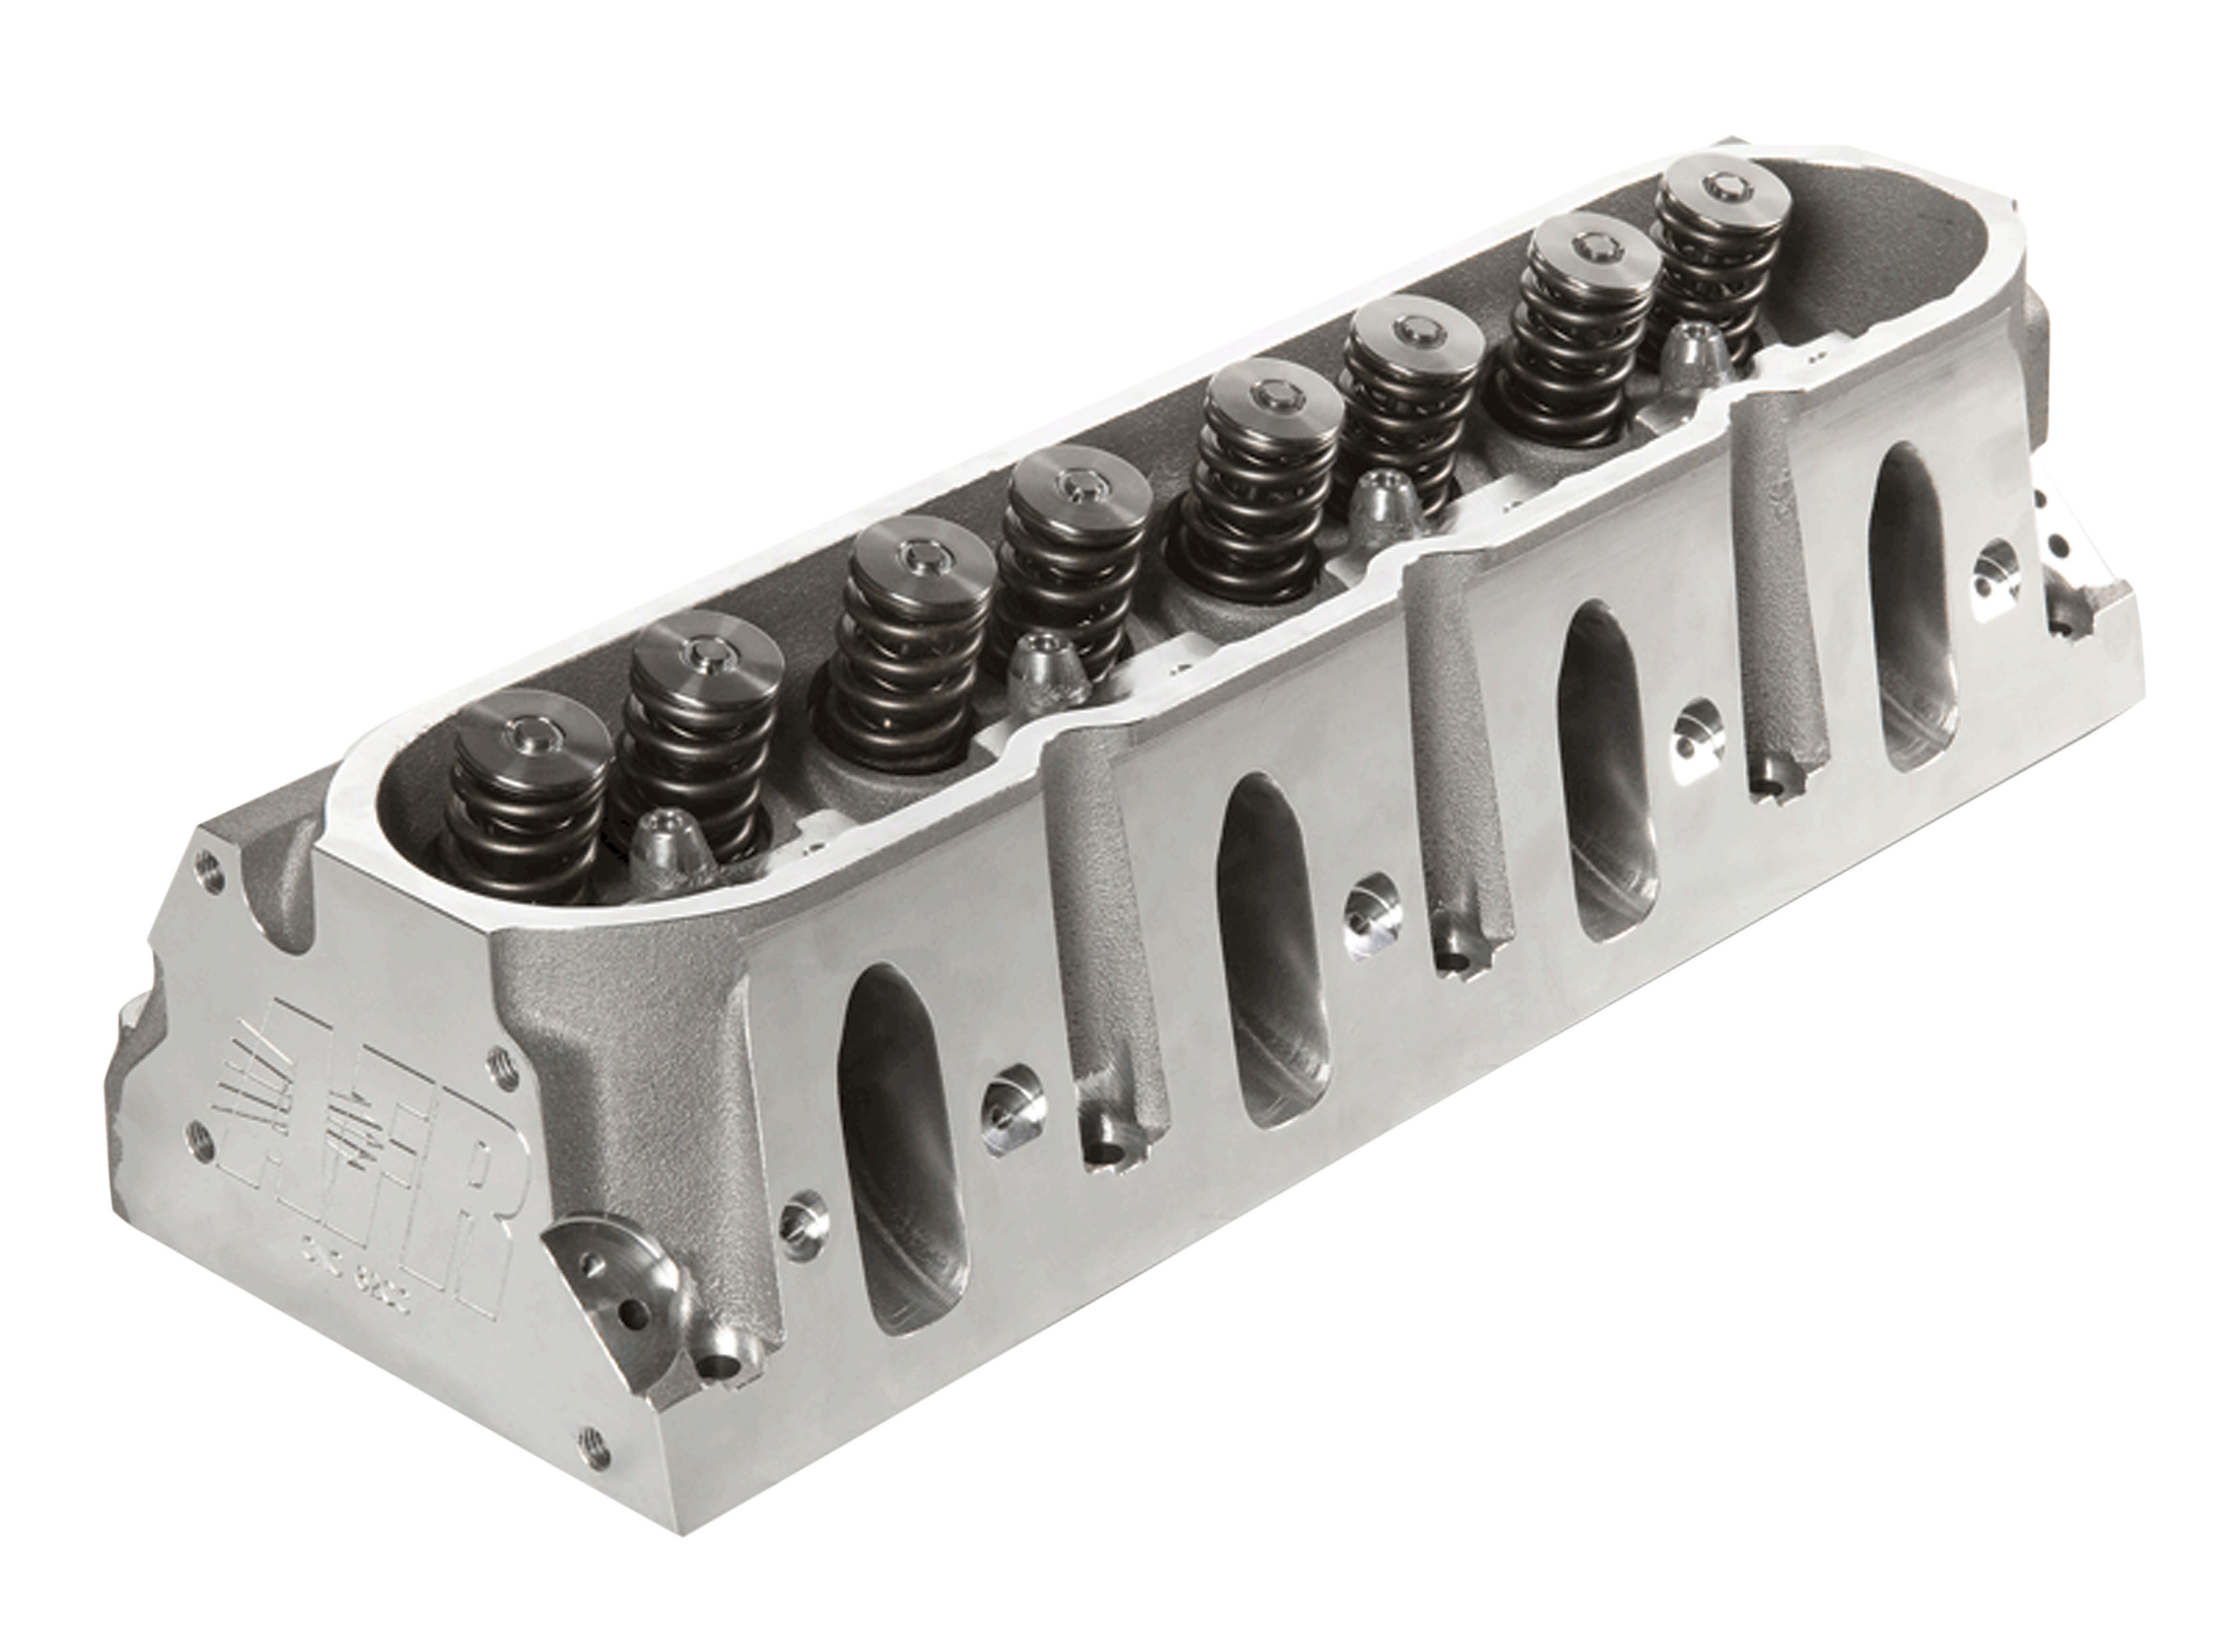 AFR LSx 245cc Fully CNC Ported Cylinder Heads, 64cc Chambers, Large Bore, Complete w/Parts